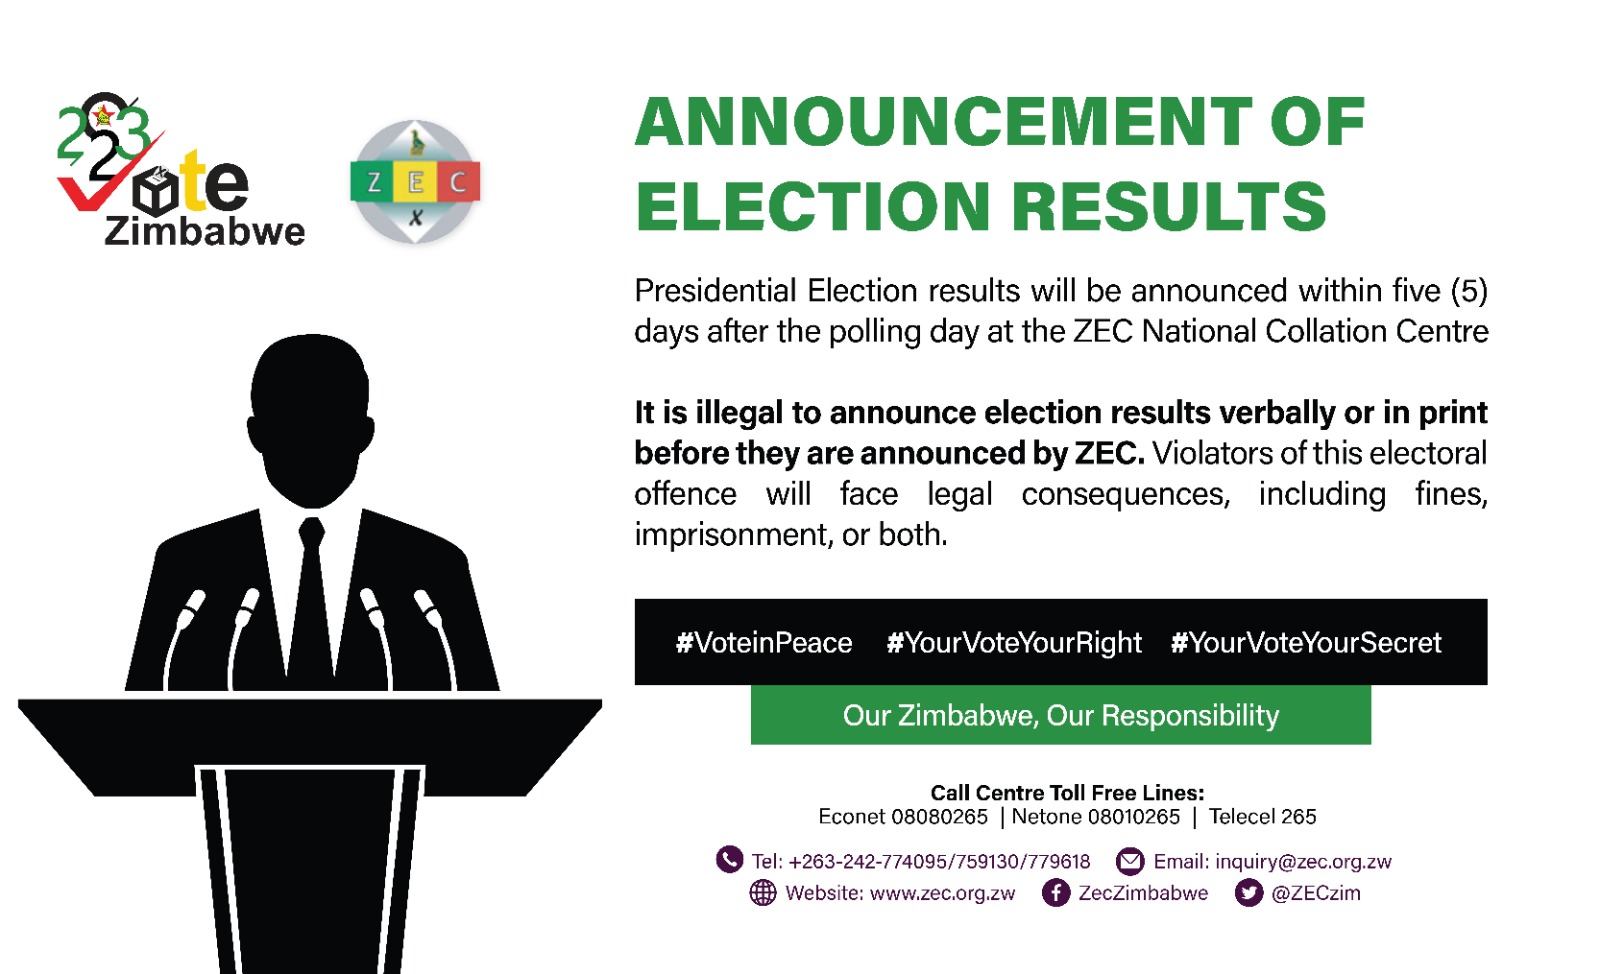 ZEC: It's Illegal To Prematurely Announce Election Results Before